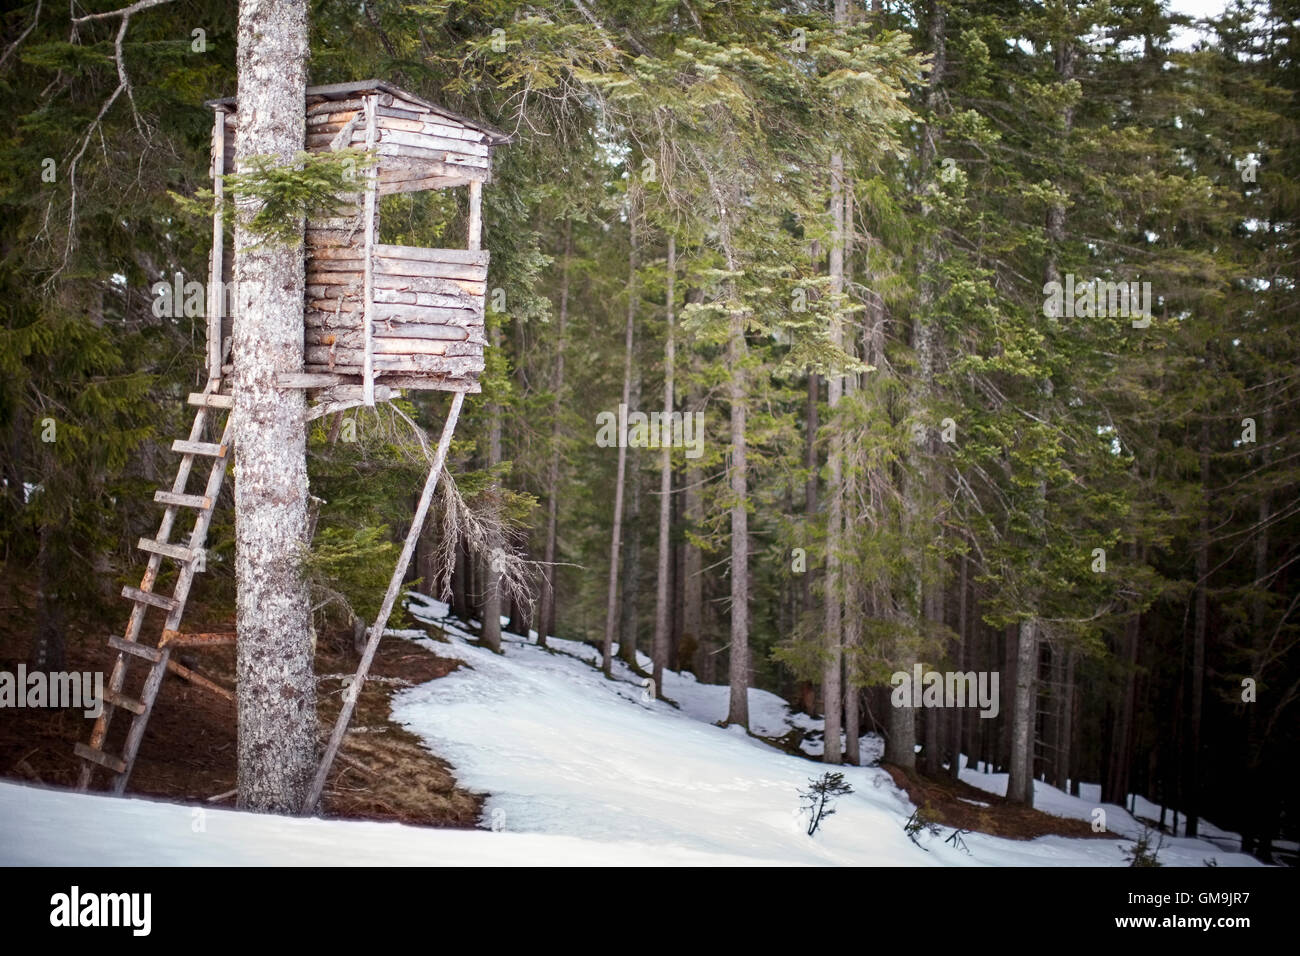 Austria, Salzburger Land, Maria Alm, Old wooden treehouse in snowy forest Stock Photo